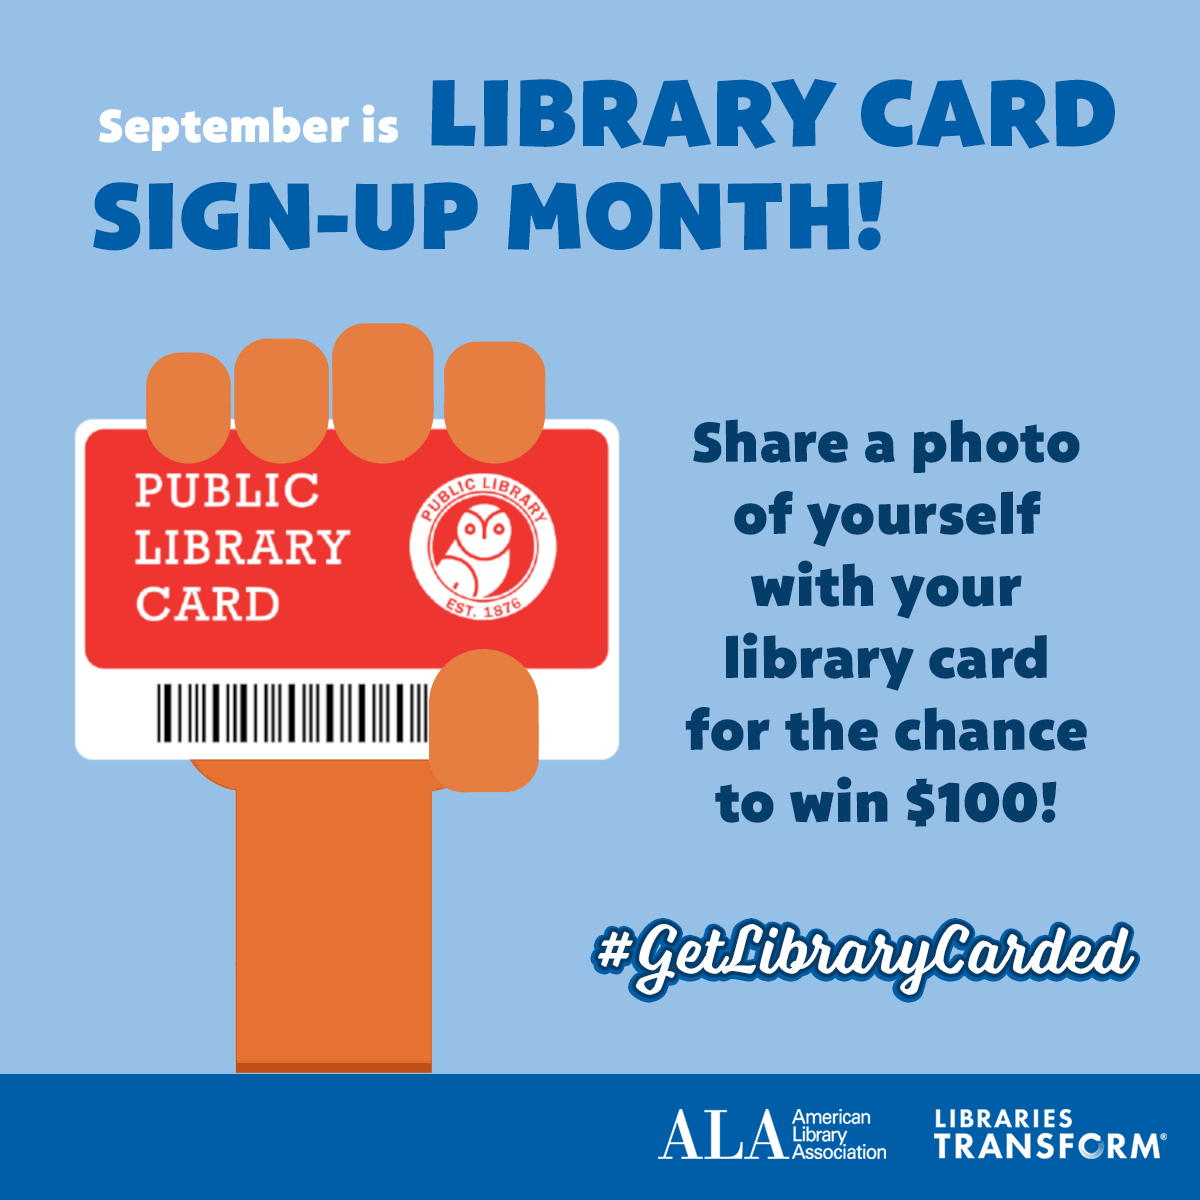 get library carded promotion image